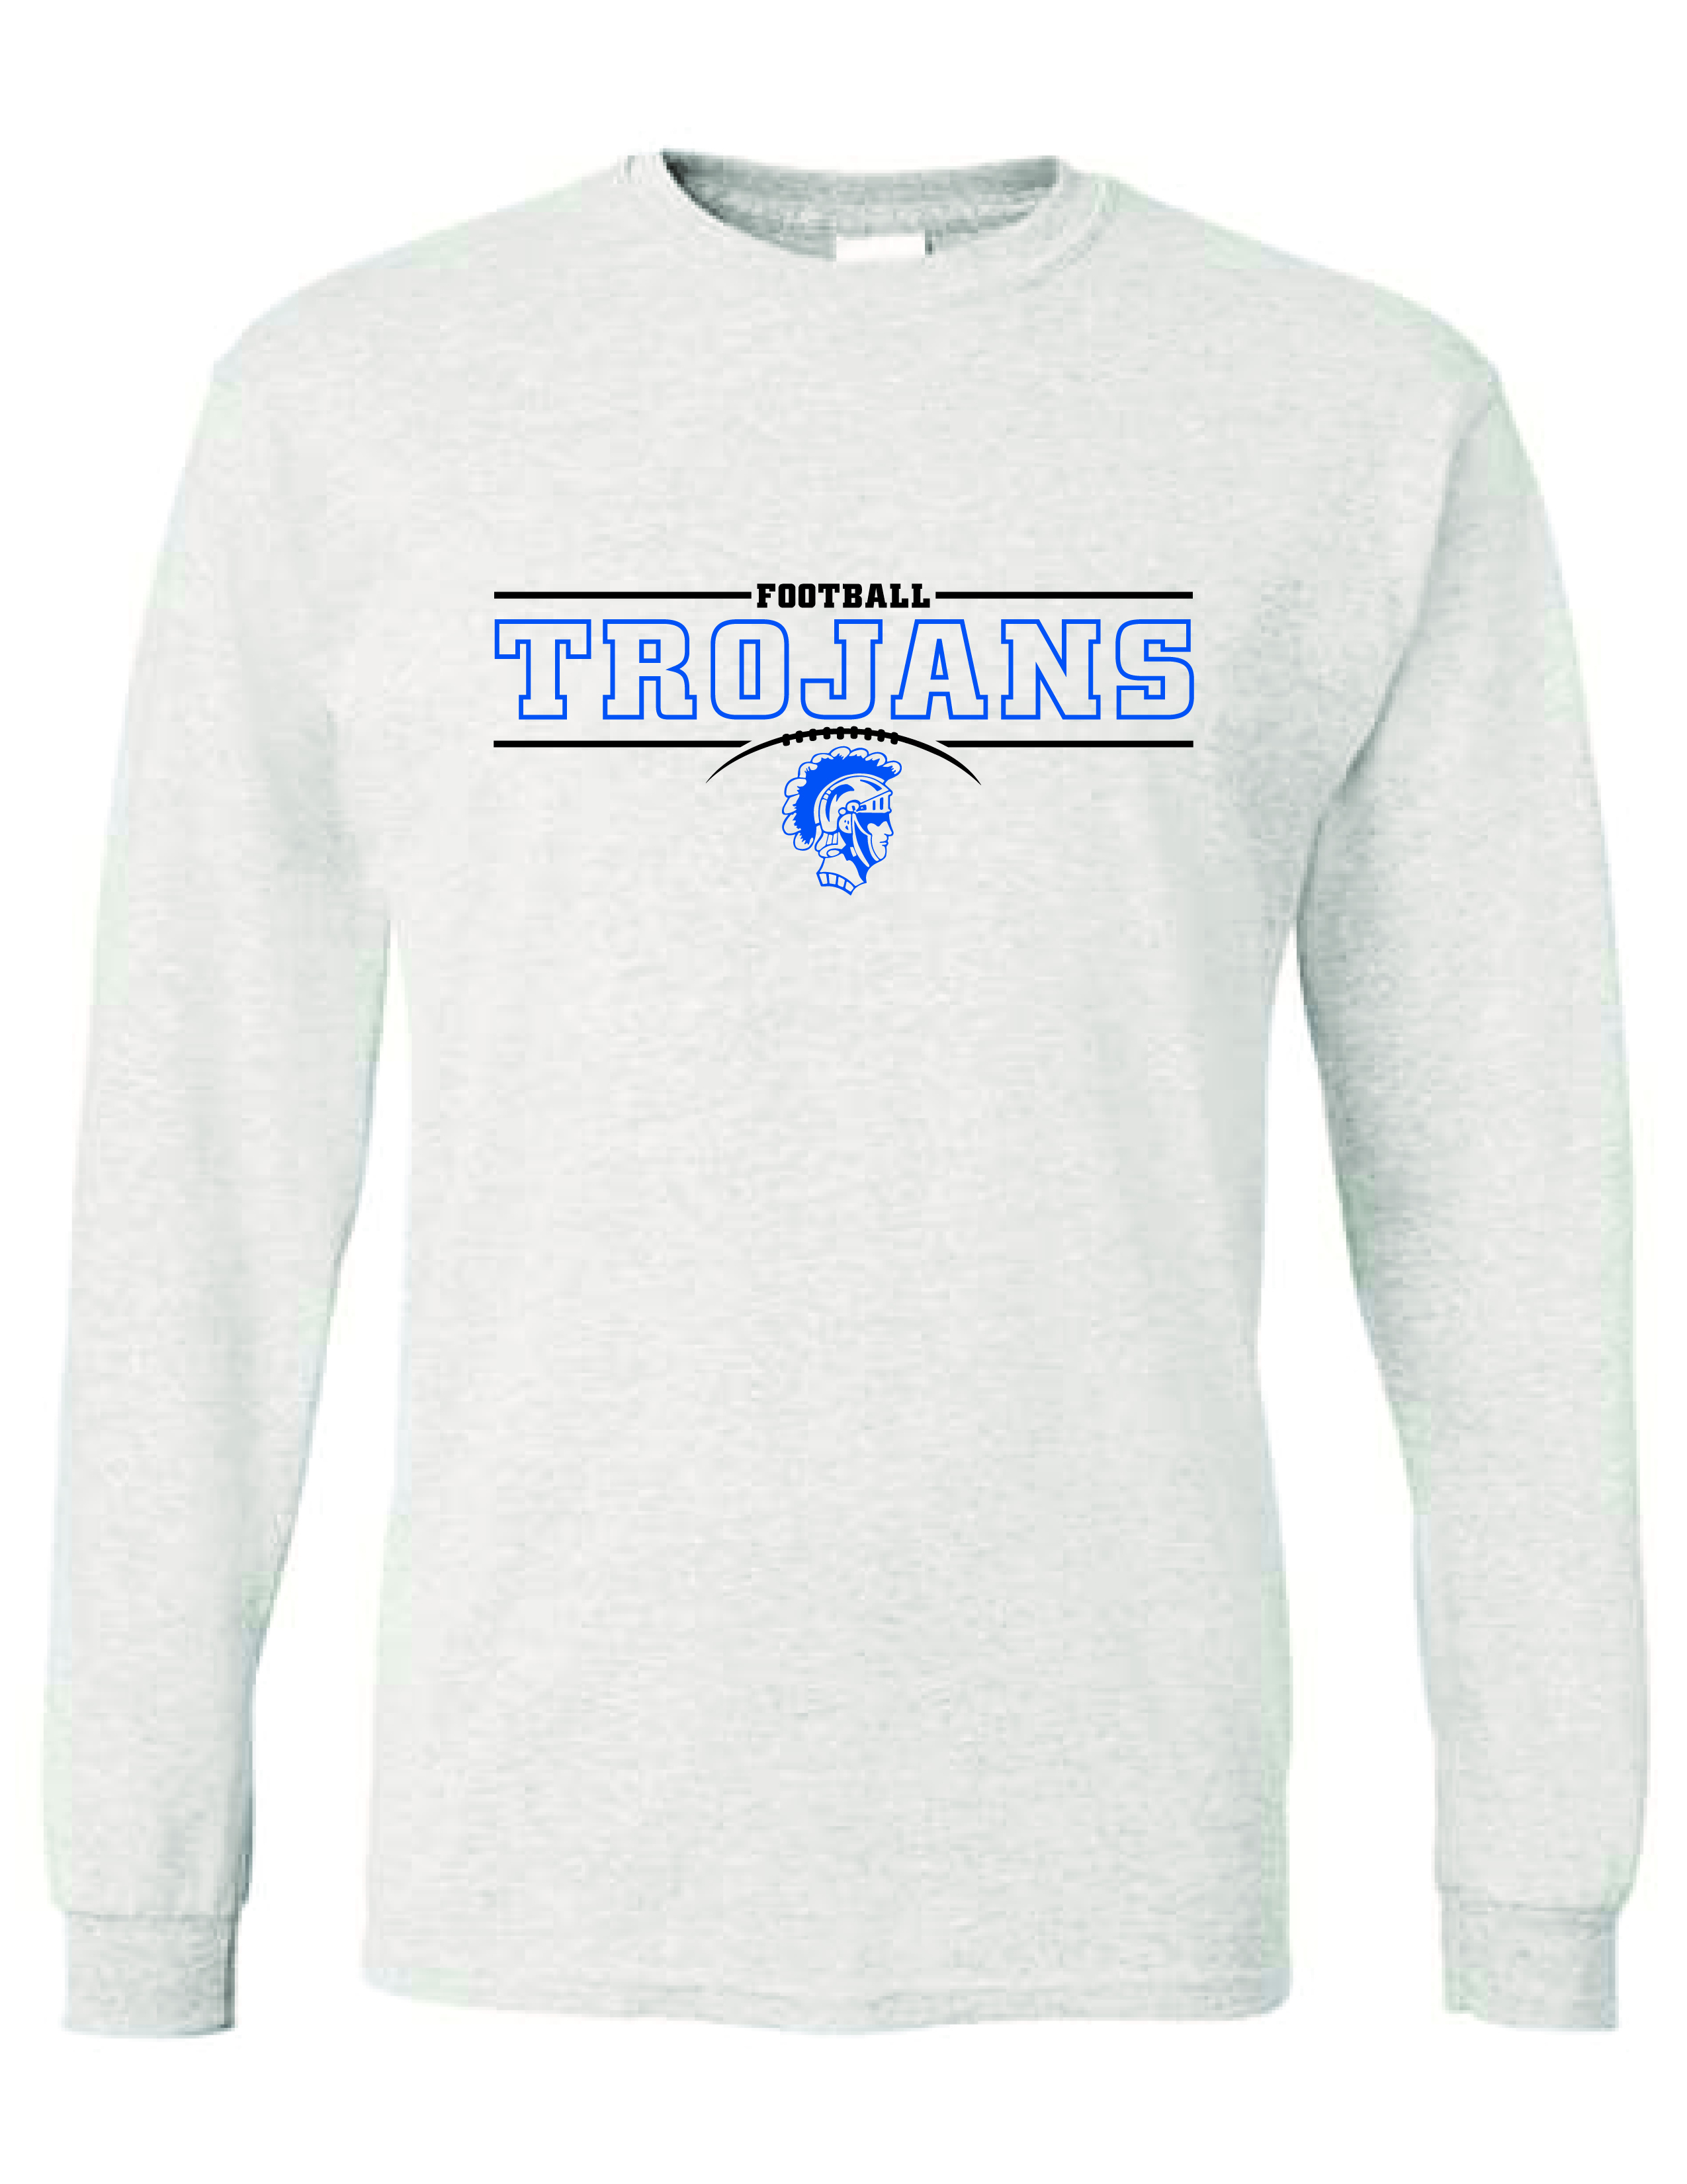 TROJAN LONG SLEEVE FOOTBALL (Men's and Youth sizes)